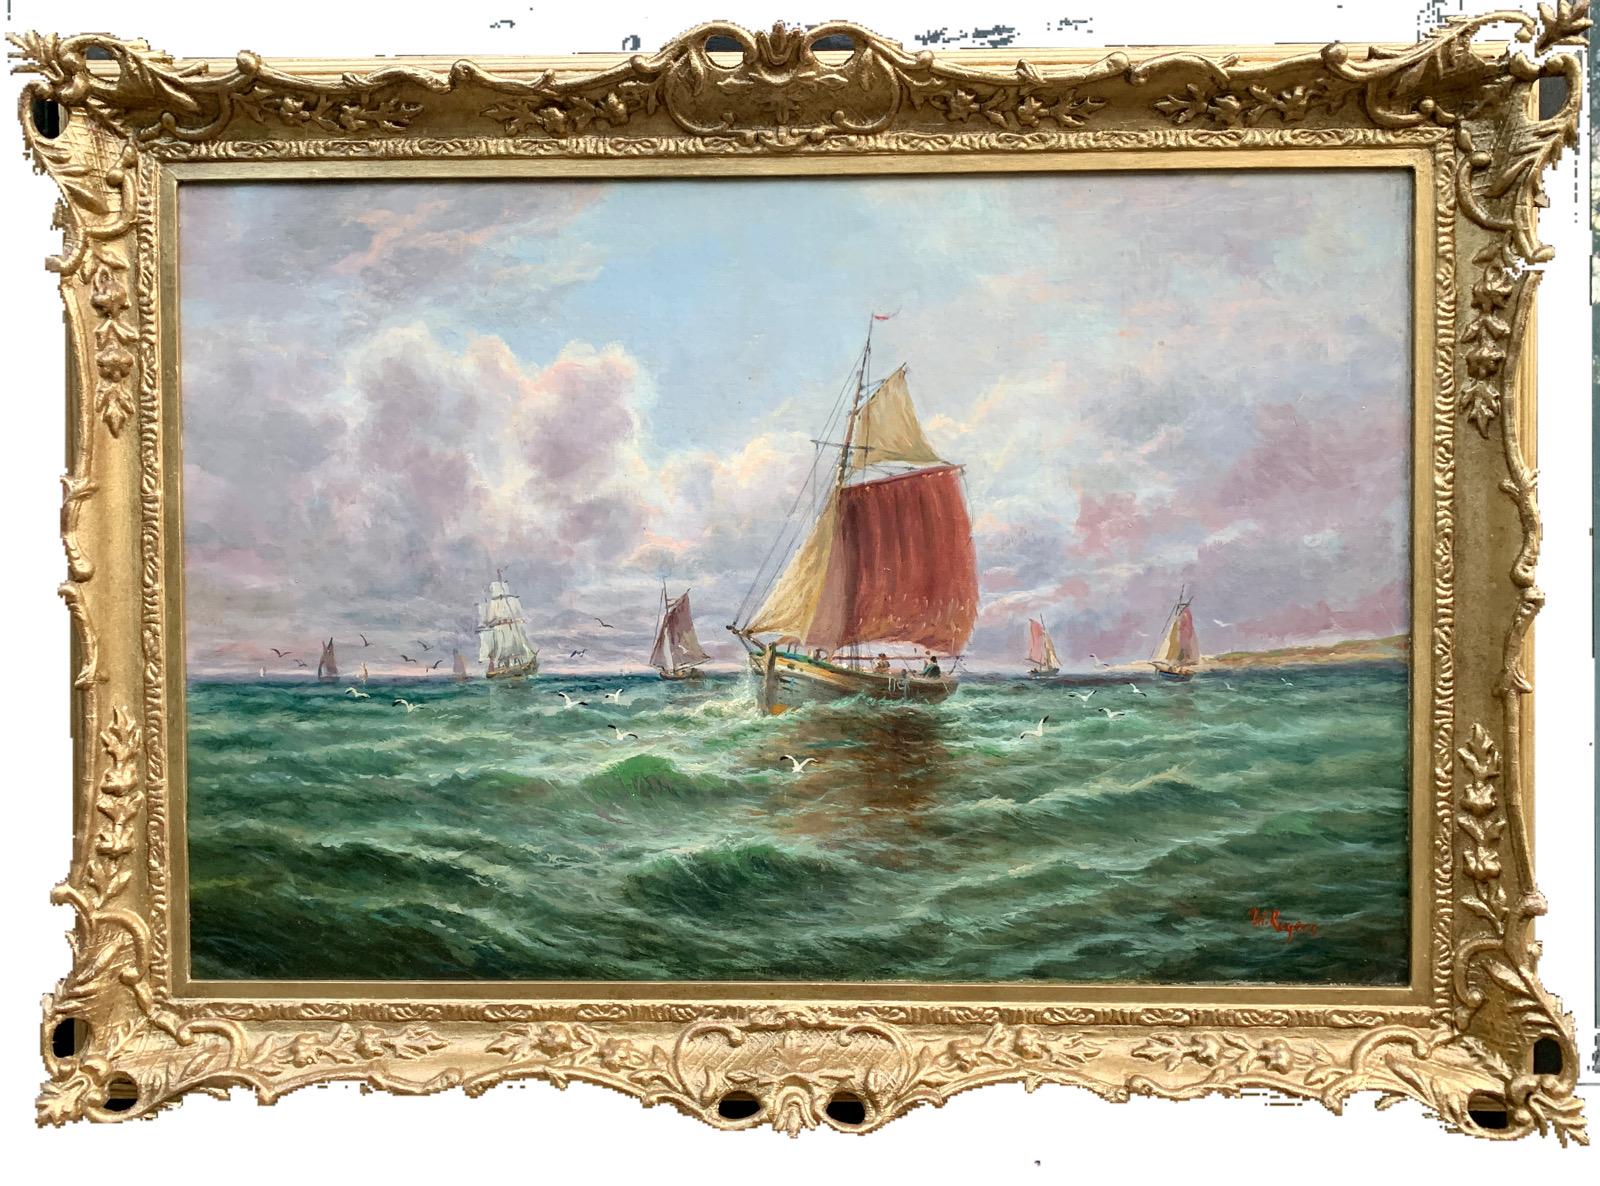 19th century Victorian English or Irish fishing boats with landscape at sea - Painting by William Rogers